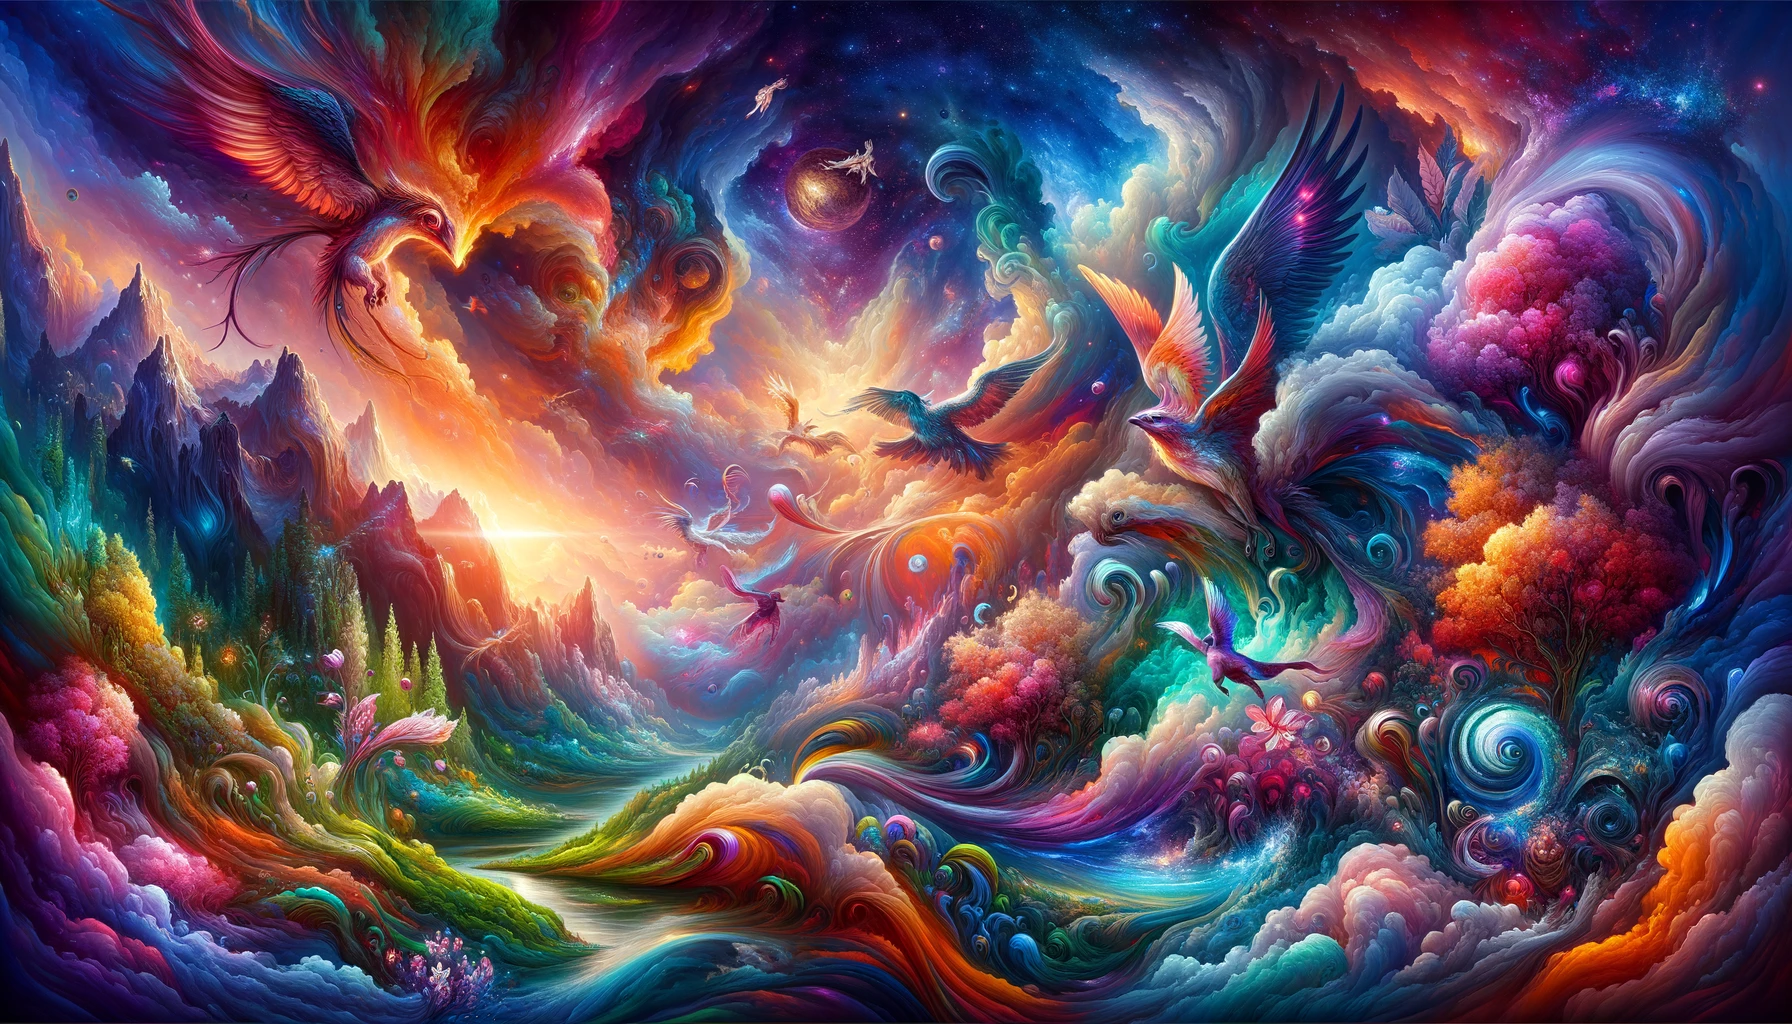 Wide-format, deeply colorful, and captivating illustration featuring a mix of surreal landscapes, mythical creatures, and dynamic energy effects, creating an enchanting and visually stunning scene.